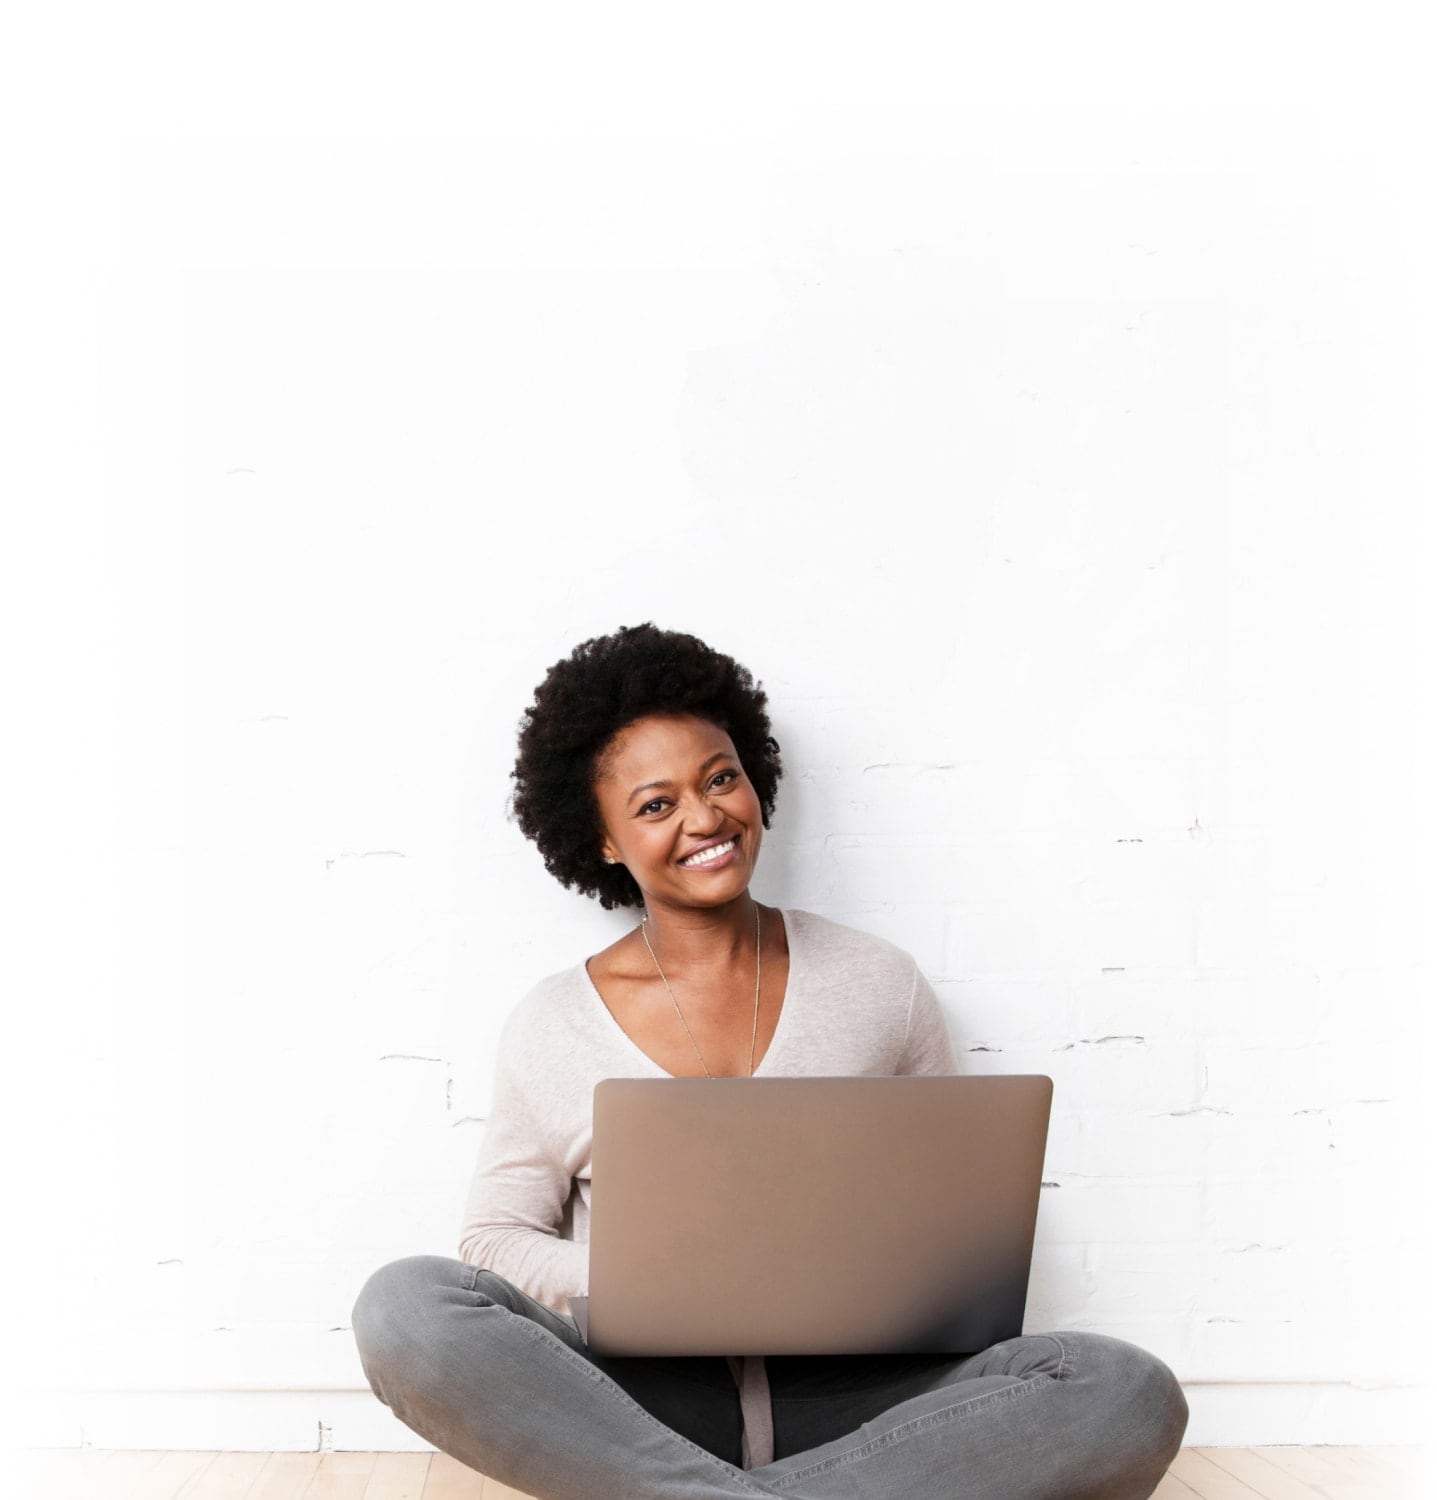 TurboTax customer Virginia is smiling as she holds her laptop open on her lap.